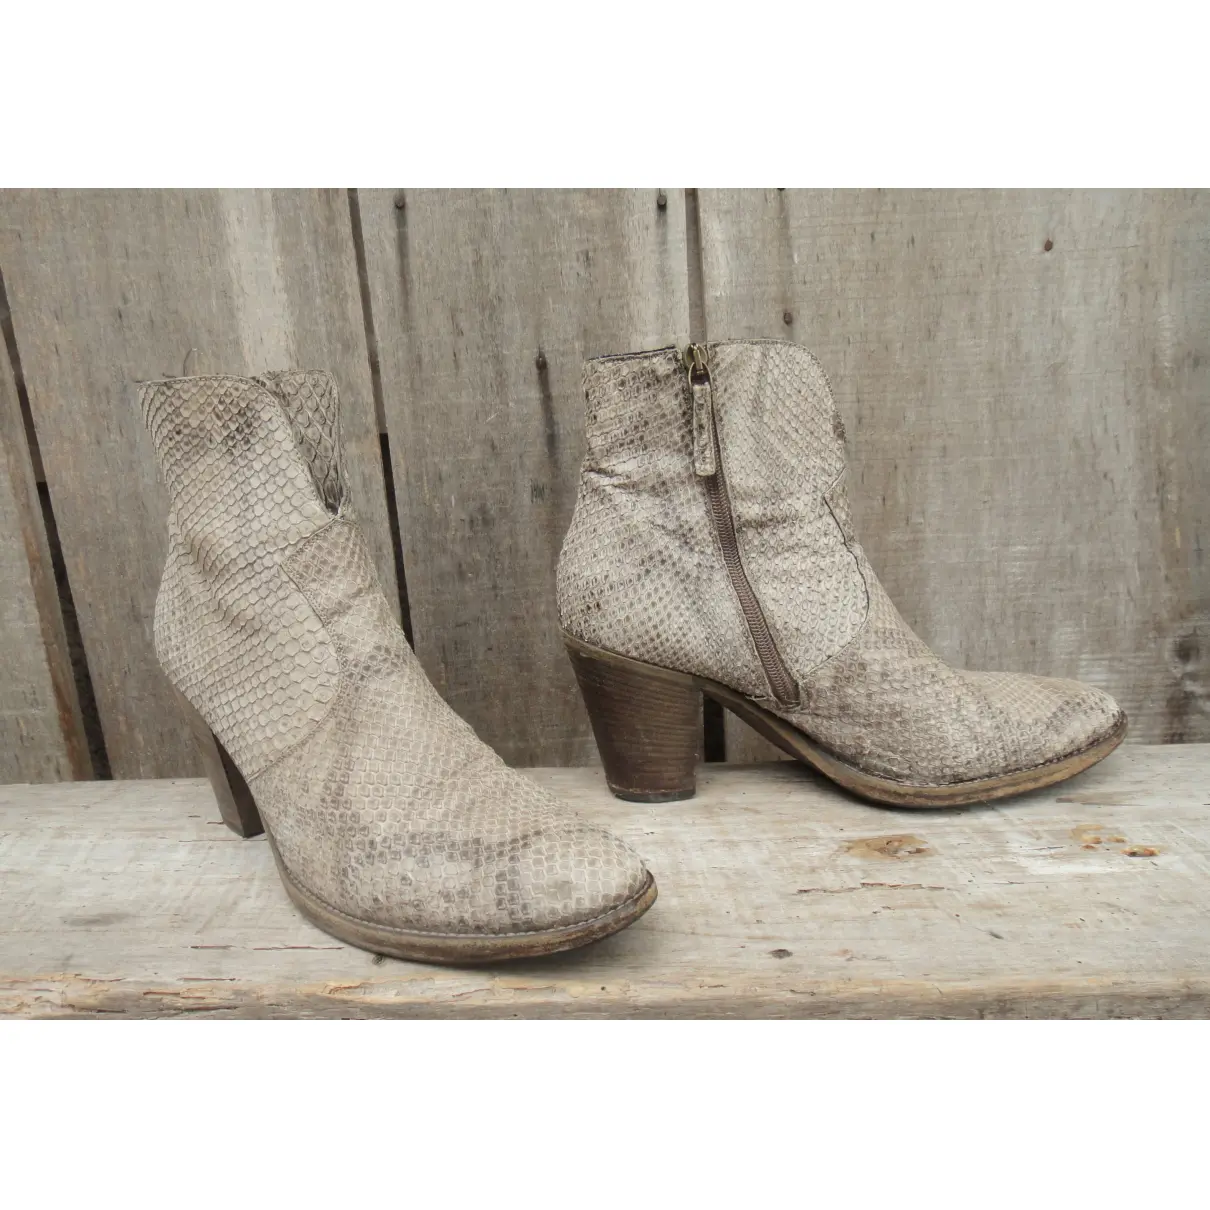 Buy Sartore Python ankle boots online